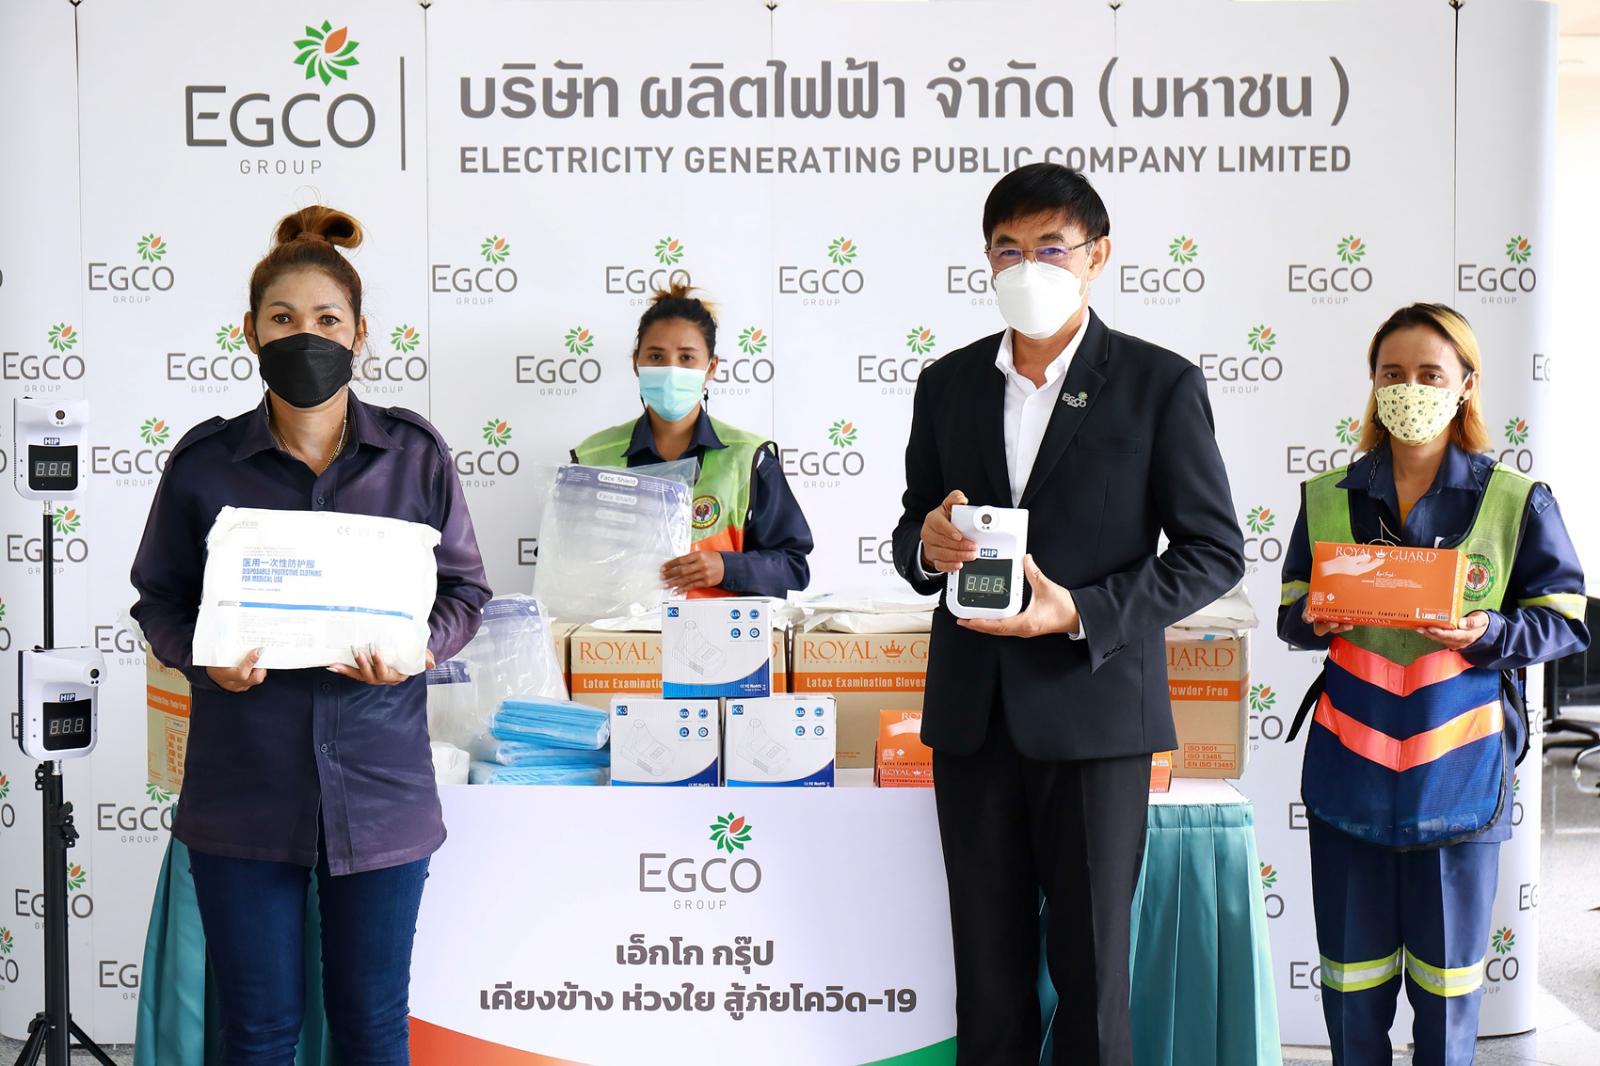 EGCO Group provide support for medical equipment for referal center in bang khae area, bangkok to fight against covid-19